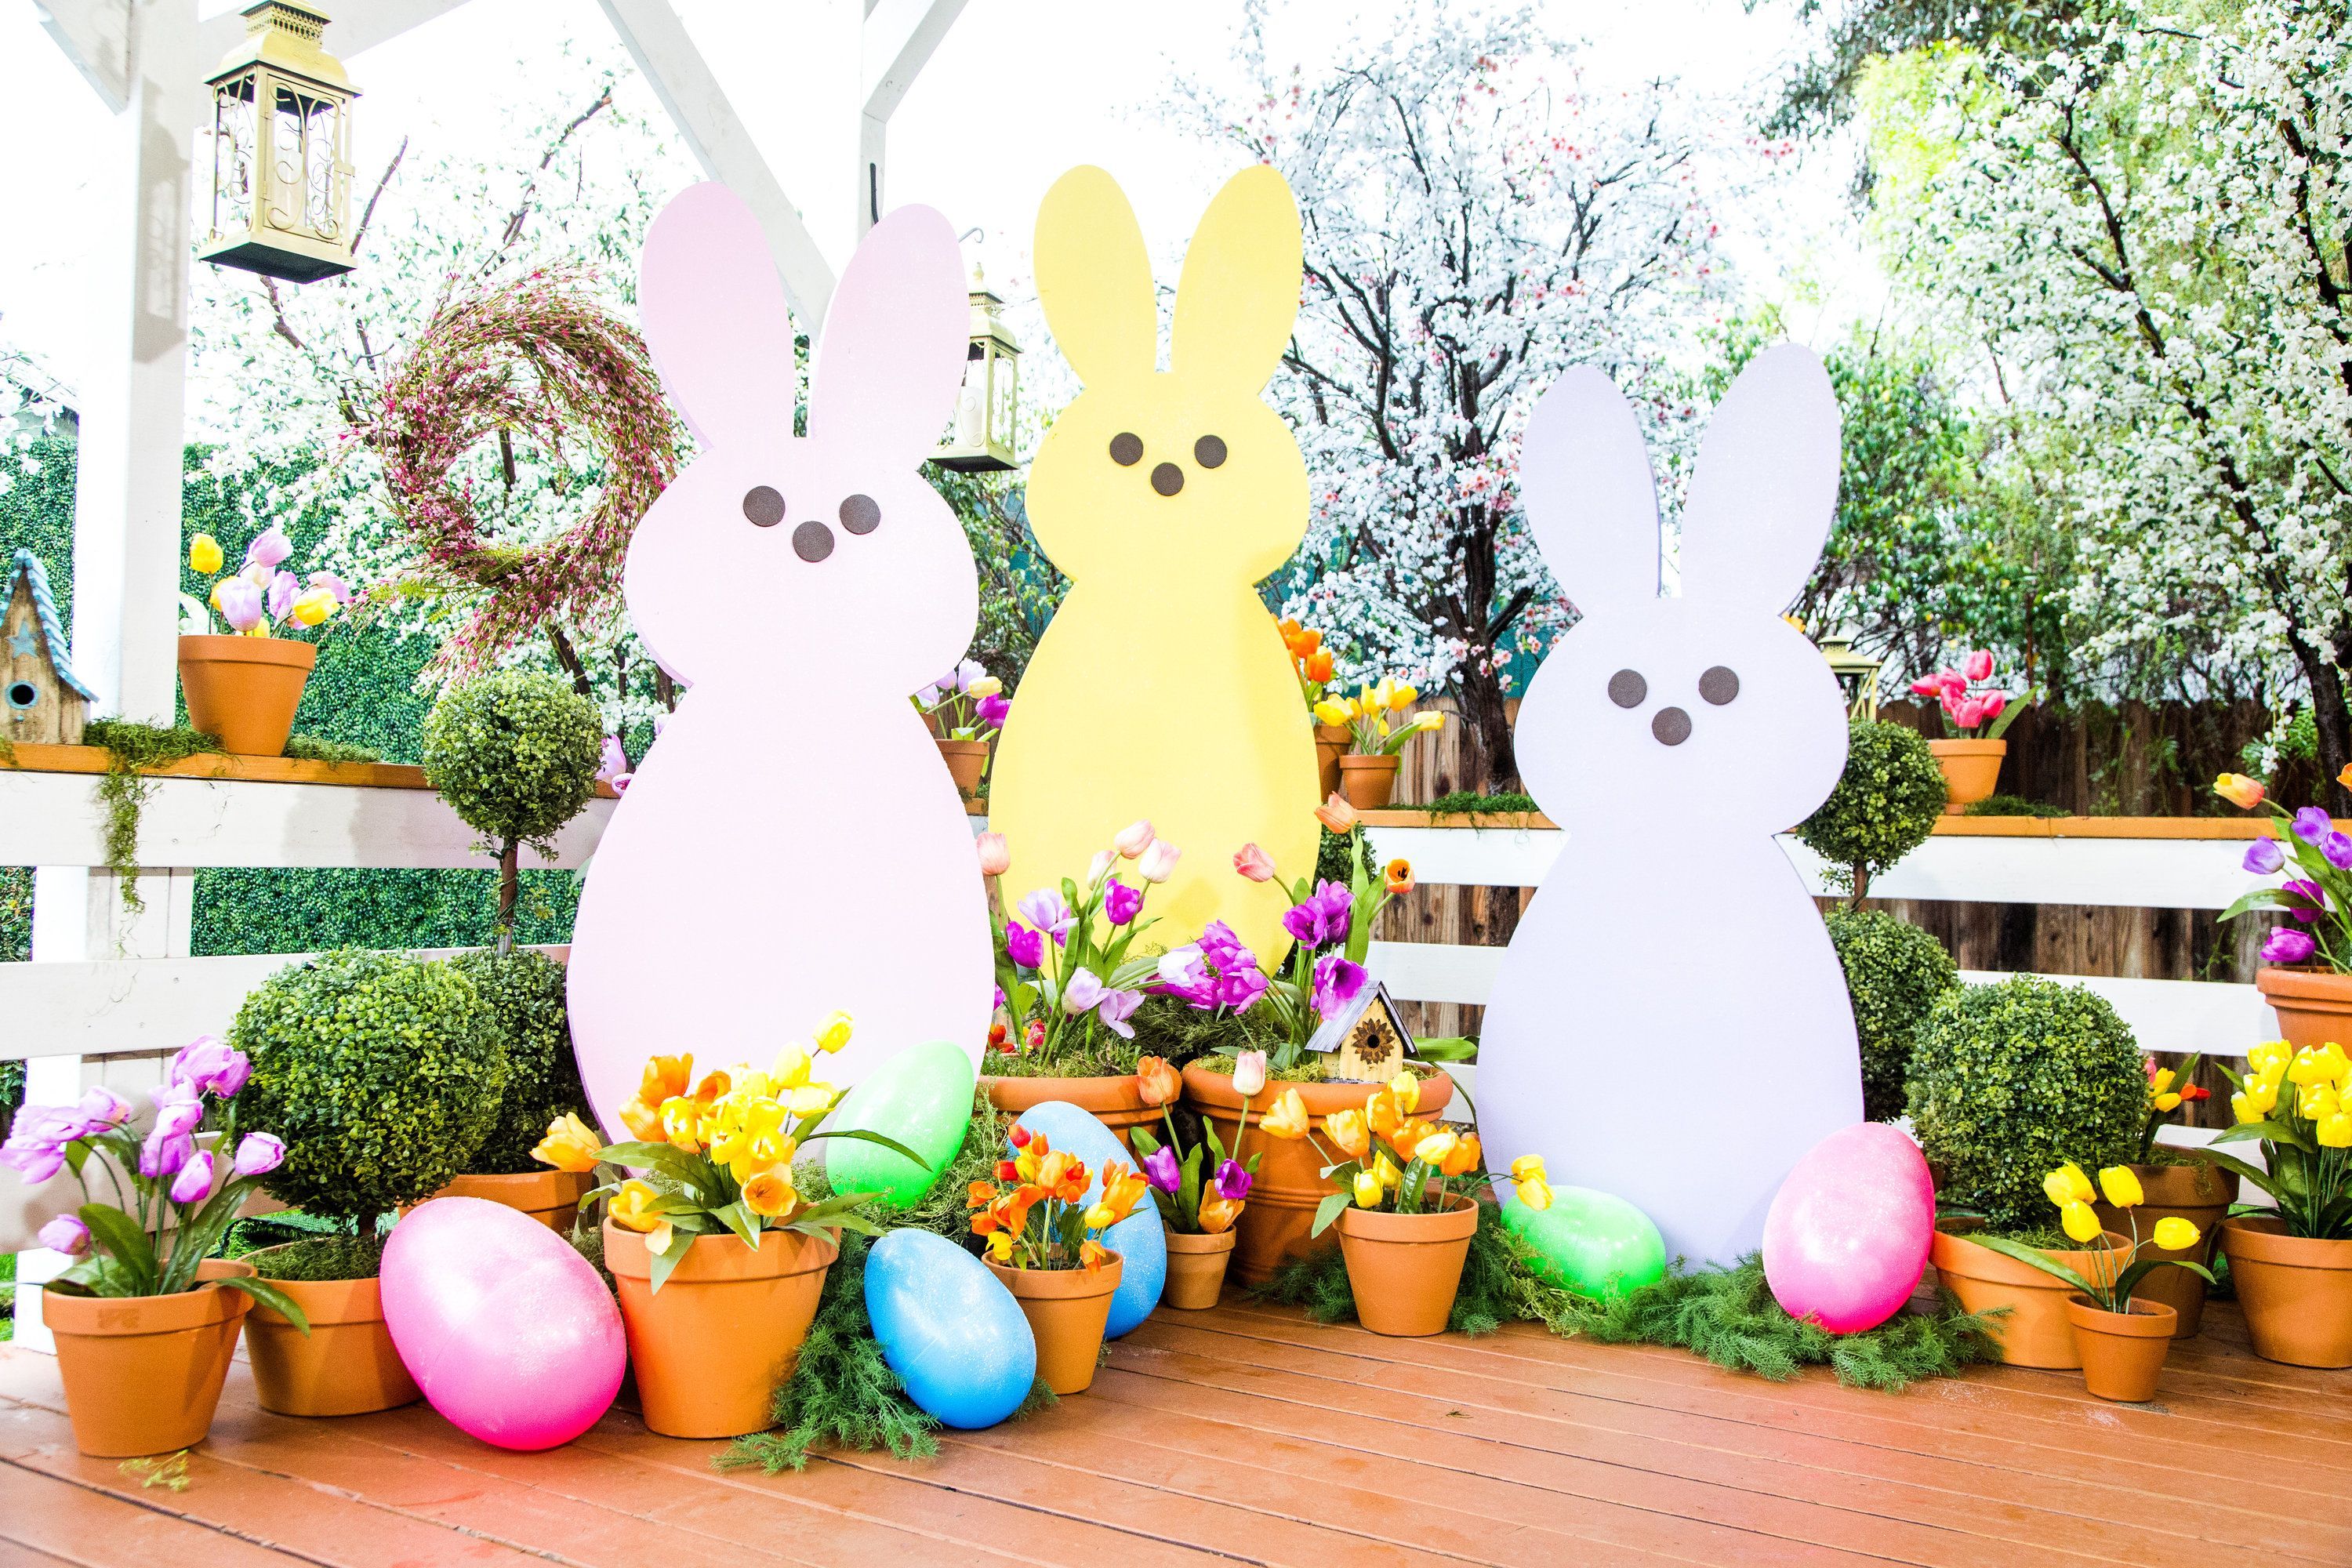 Get ready for Easter with Kenneth Wingard's DIY Colossal Yard